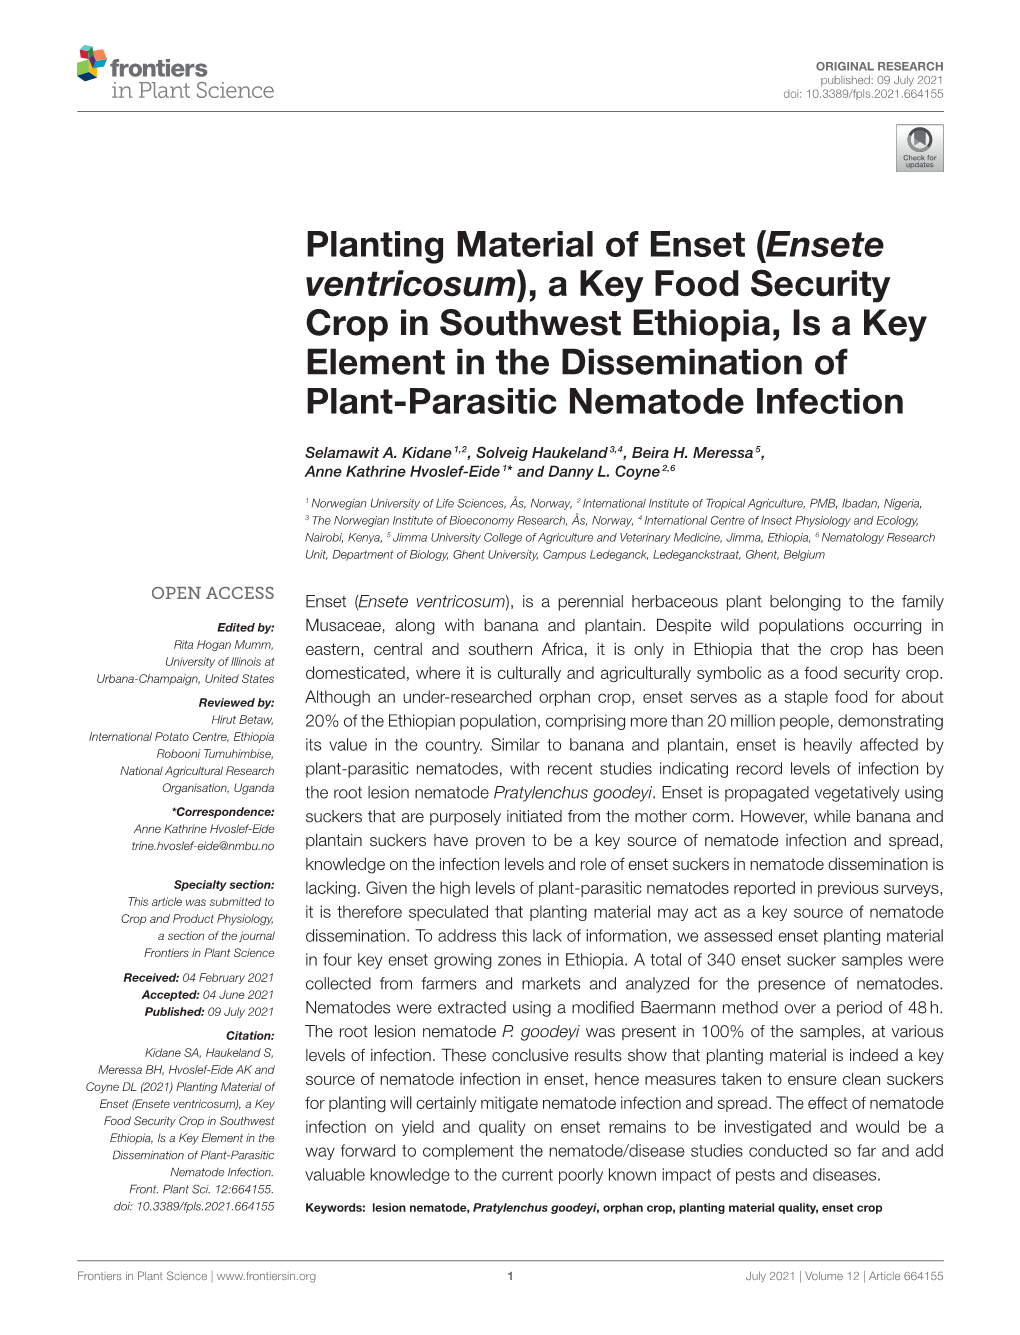 (Ensete Ventricosum), a Key Food Security Crop in Southwest Ethiopia, Is a Key Element in the Dissemination of Plant-Parasitic Nematode Infection